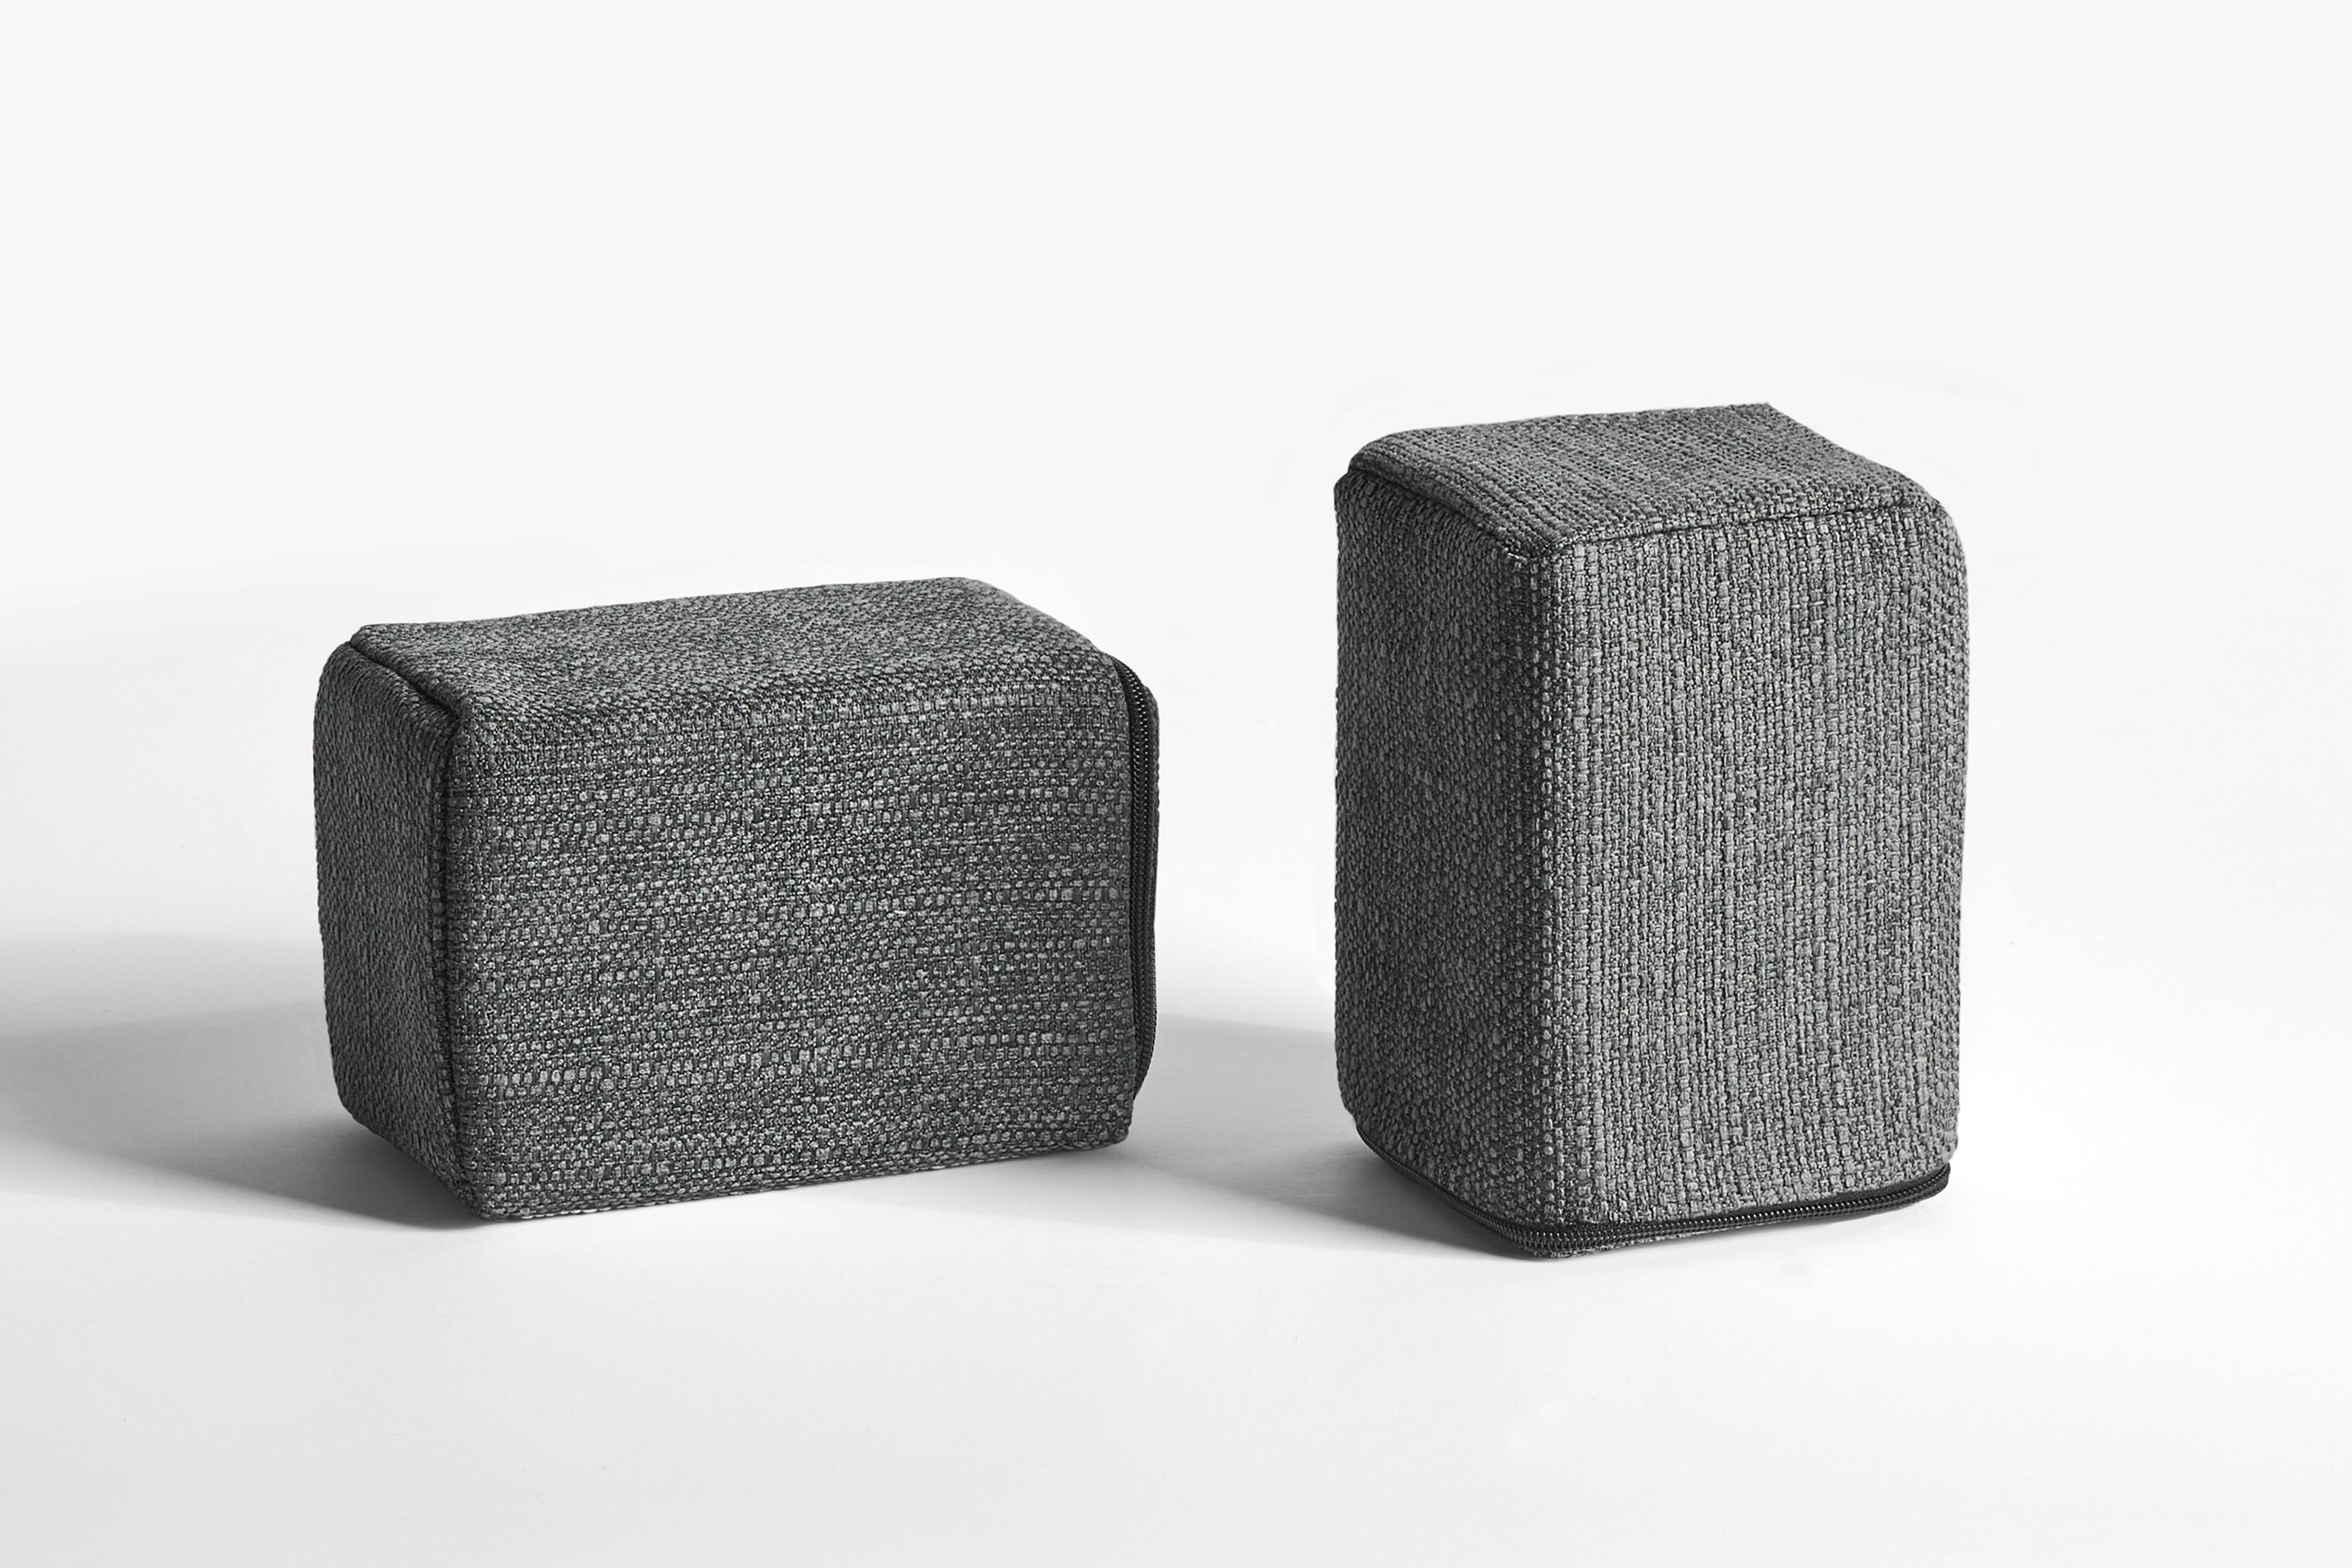 Dark Charcoal Linen Weave Bolsters Product Image